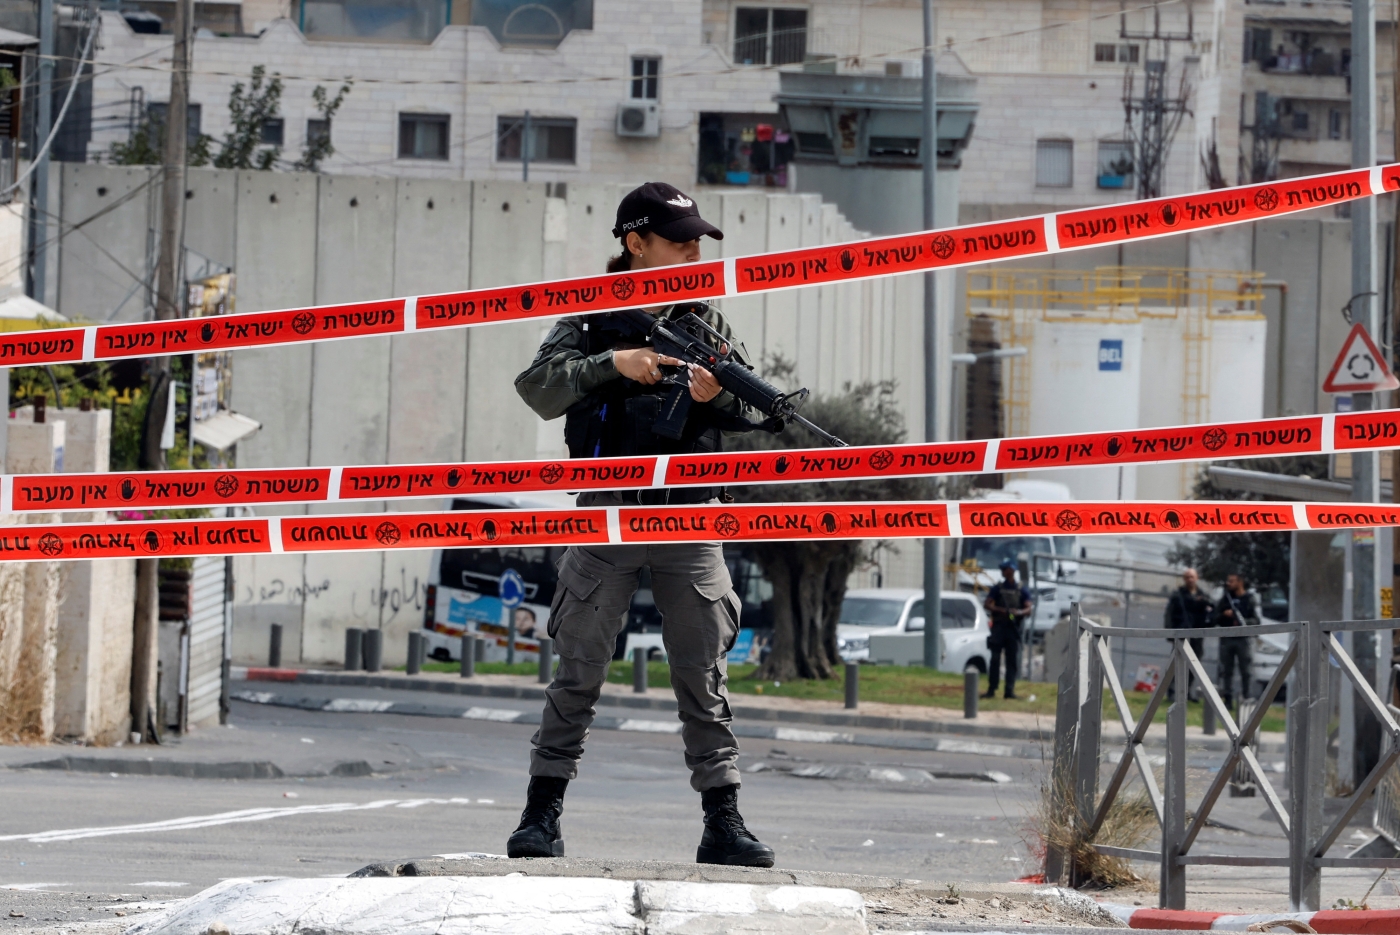 An Israeli soldier stands guard at the entrance to Shuafat refugee camp during a manhunt following a shooting incident at a check point in East Jerusalem 9 Octobe 2022 (Reuters)